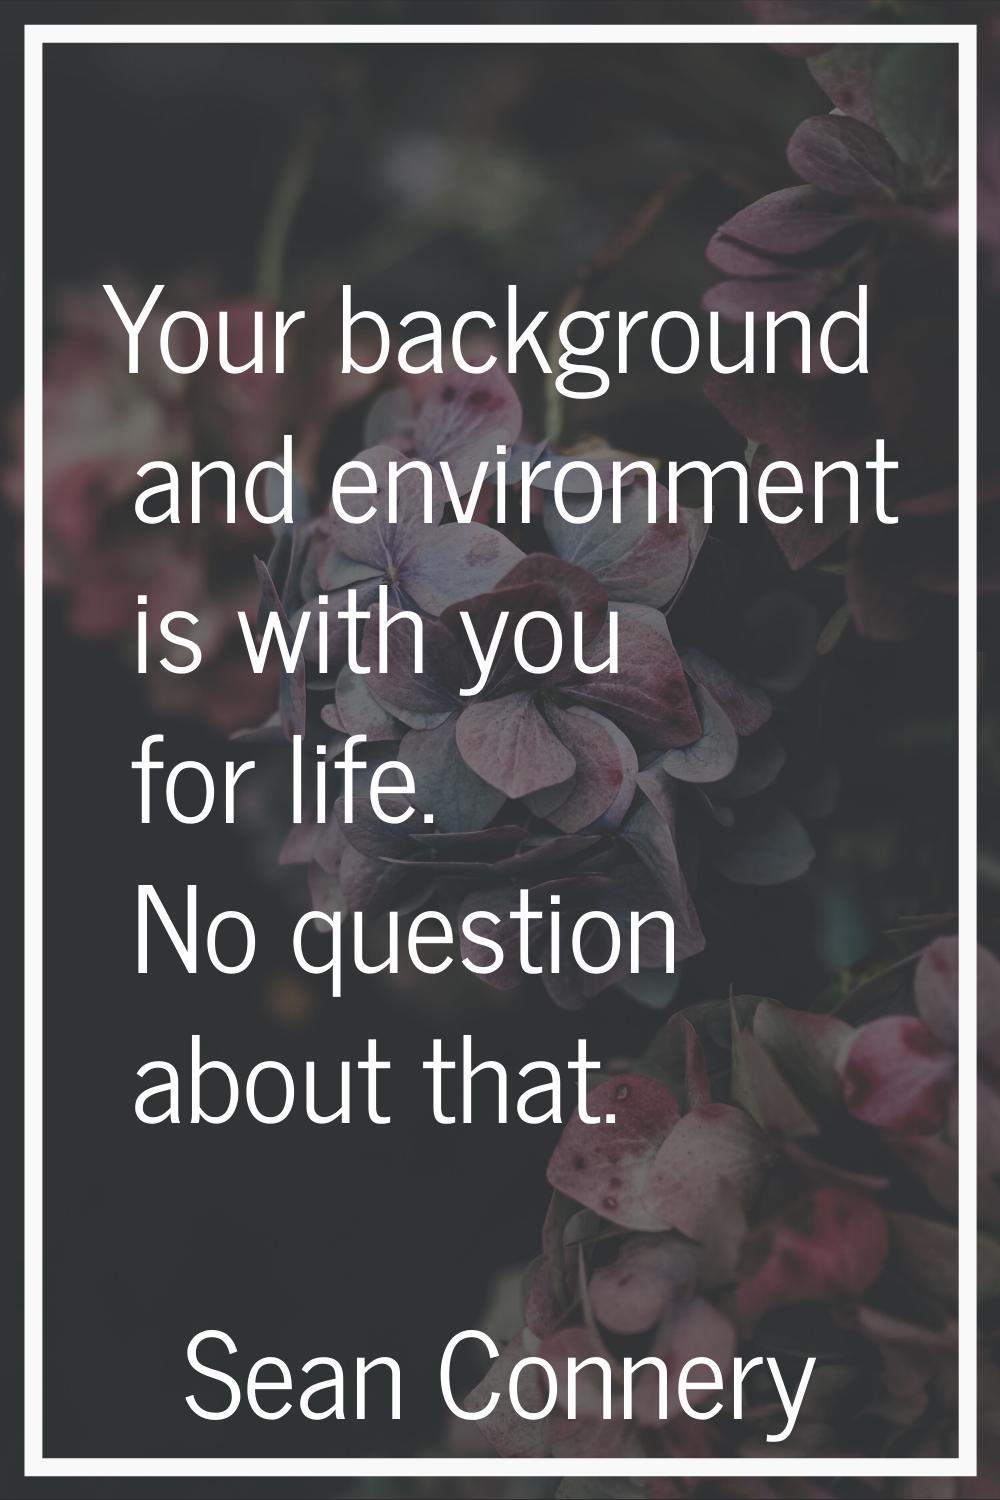 Your background and environment is with you for life. No question about that.